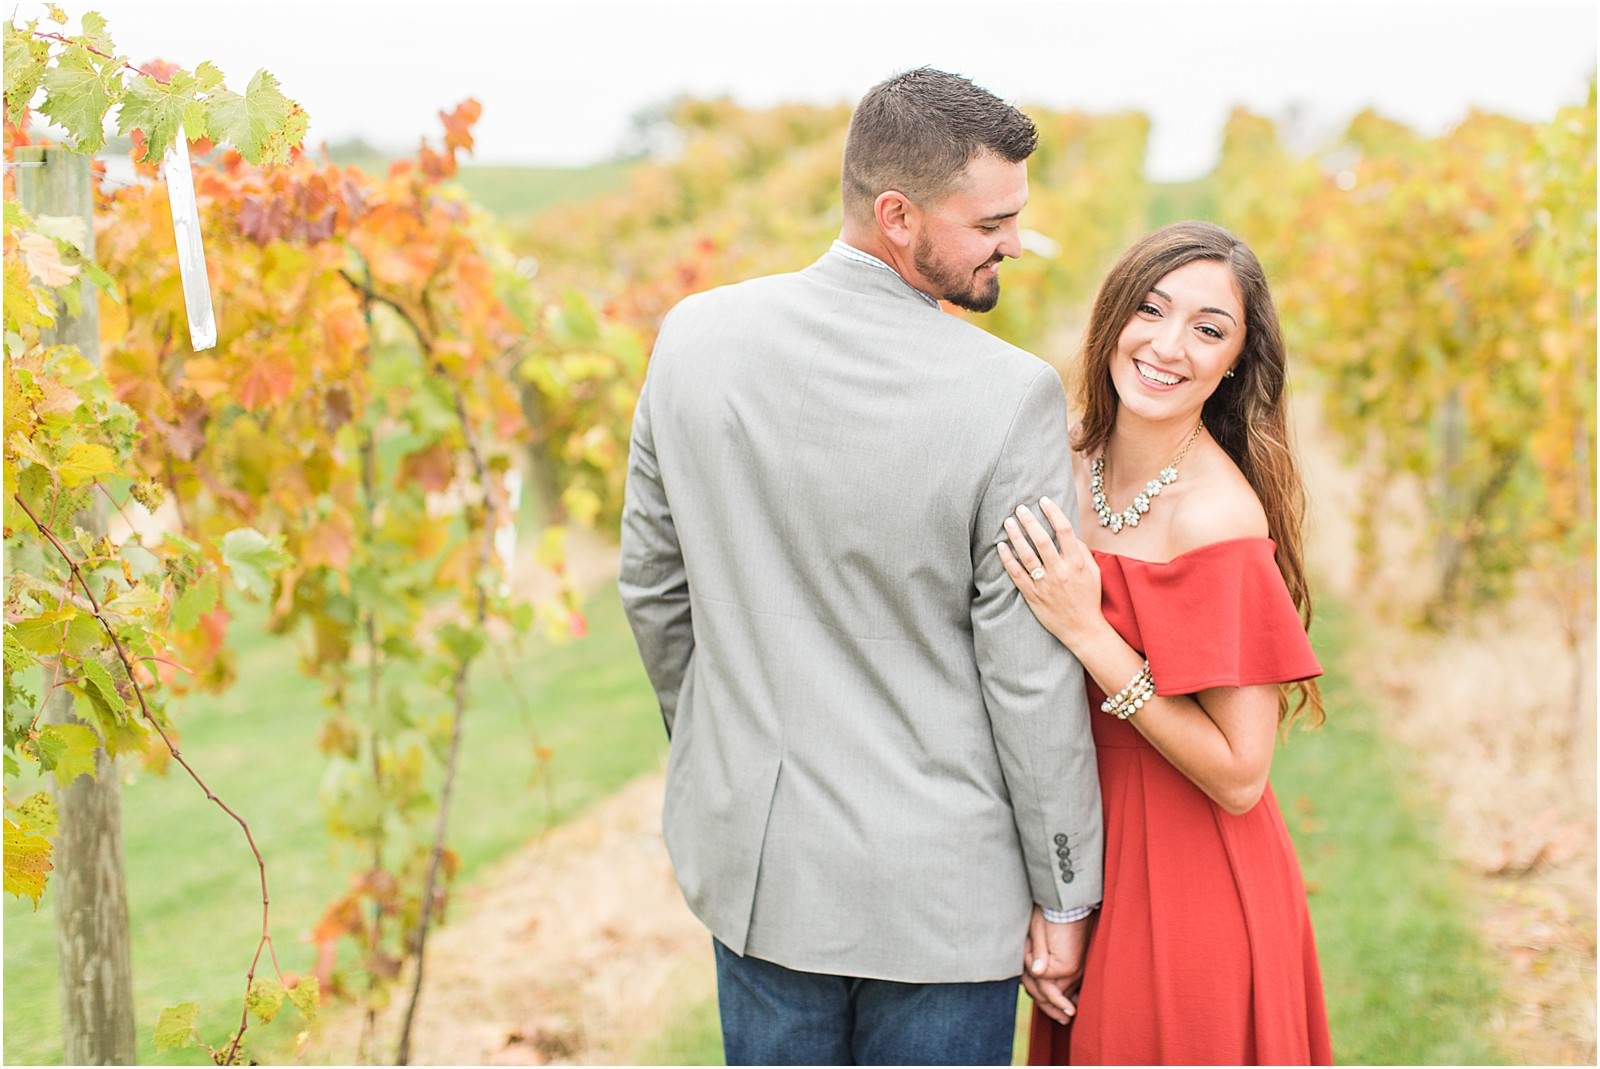 A Fall Oliver Winery Engagement Session | Sally and Andrew | Bret and Brandie Photography 0035.jpg